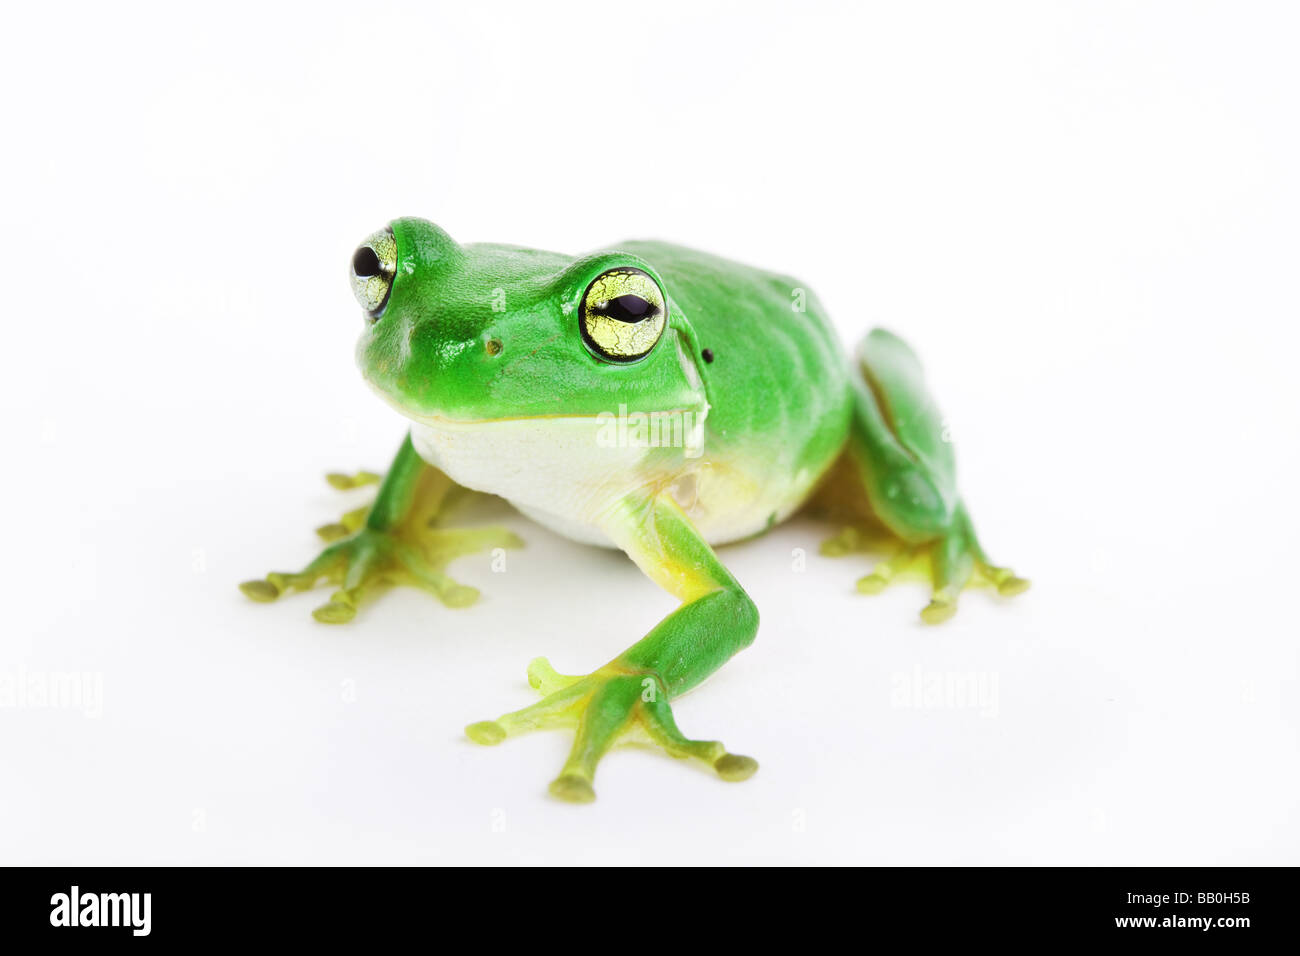 Little tree frog on white background close up Stock Photo